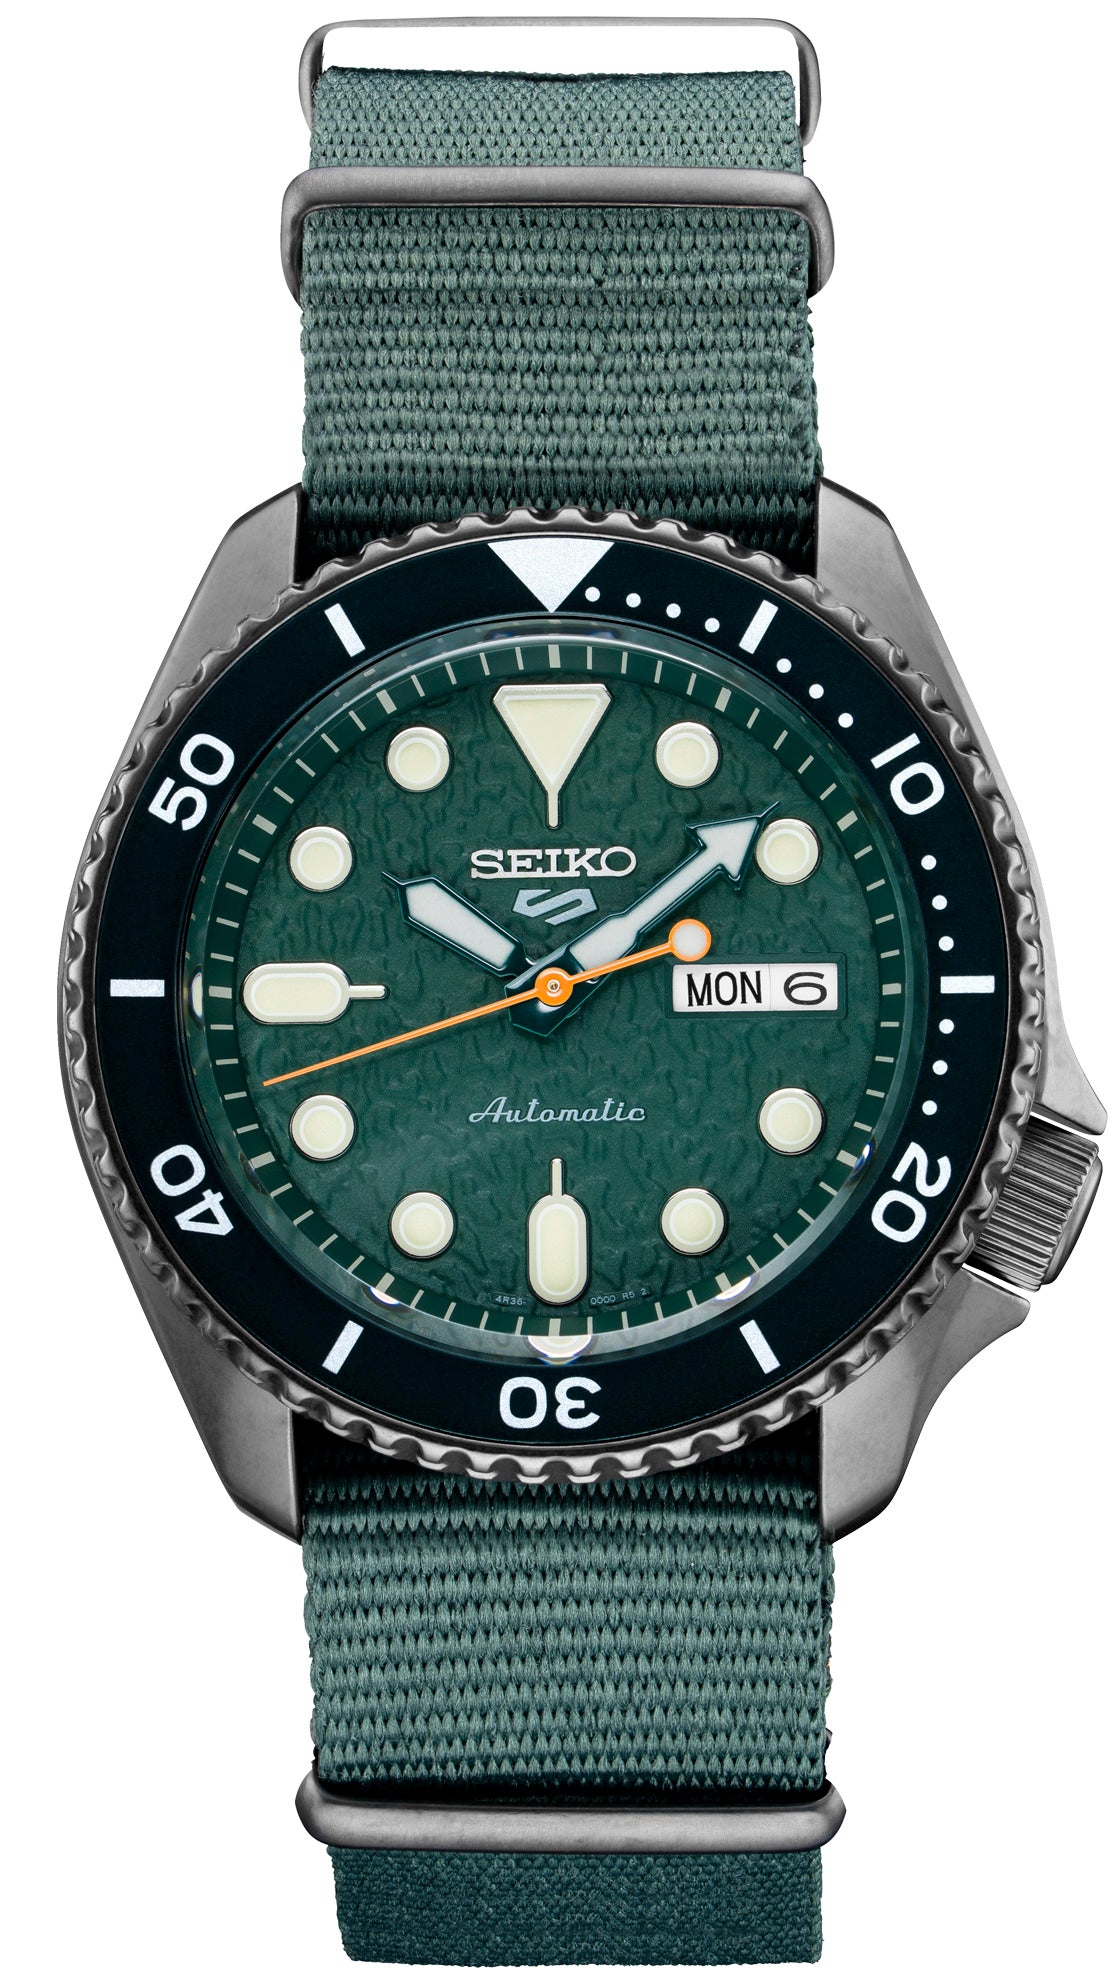 Seiko 5 Sports Men's Stainless Watch in color Green from the front view